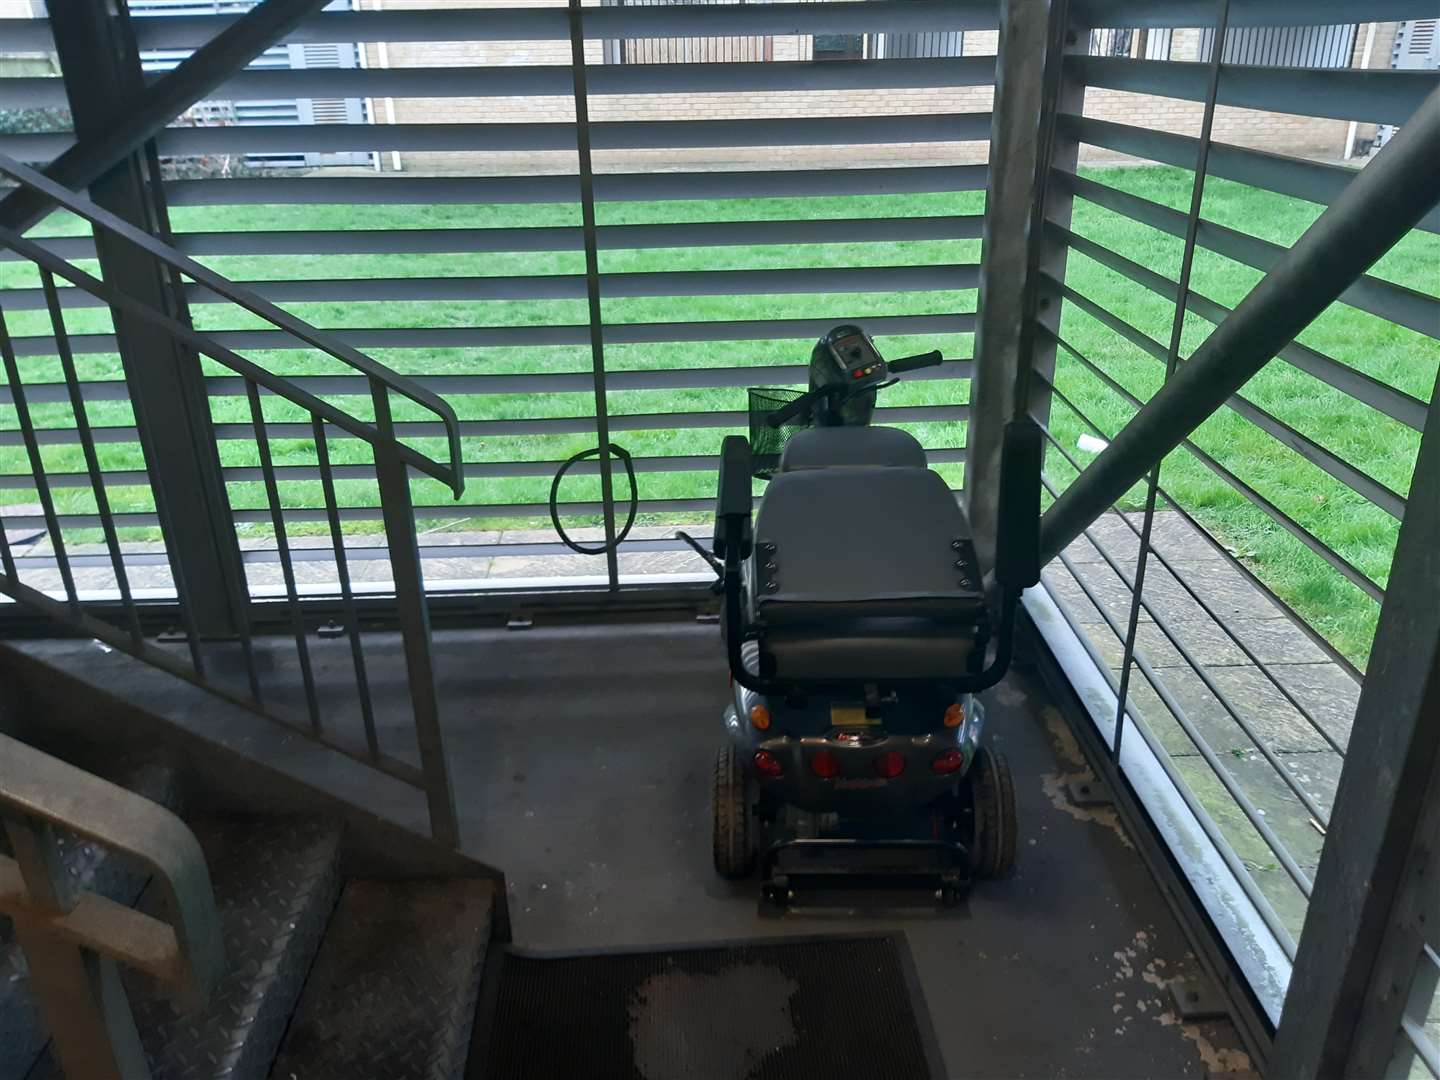 Mr Leney has been told he cannot keep his mobility scooter anywhere in the building.